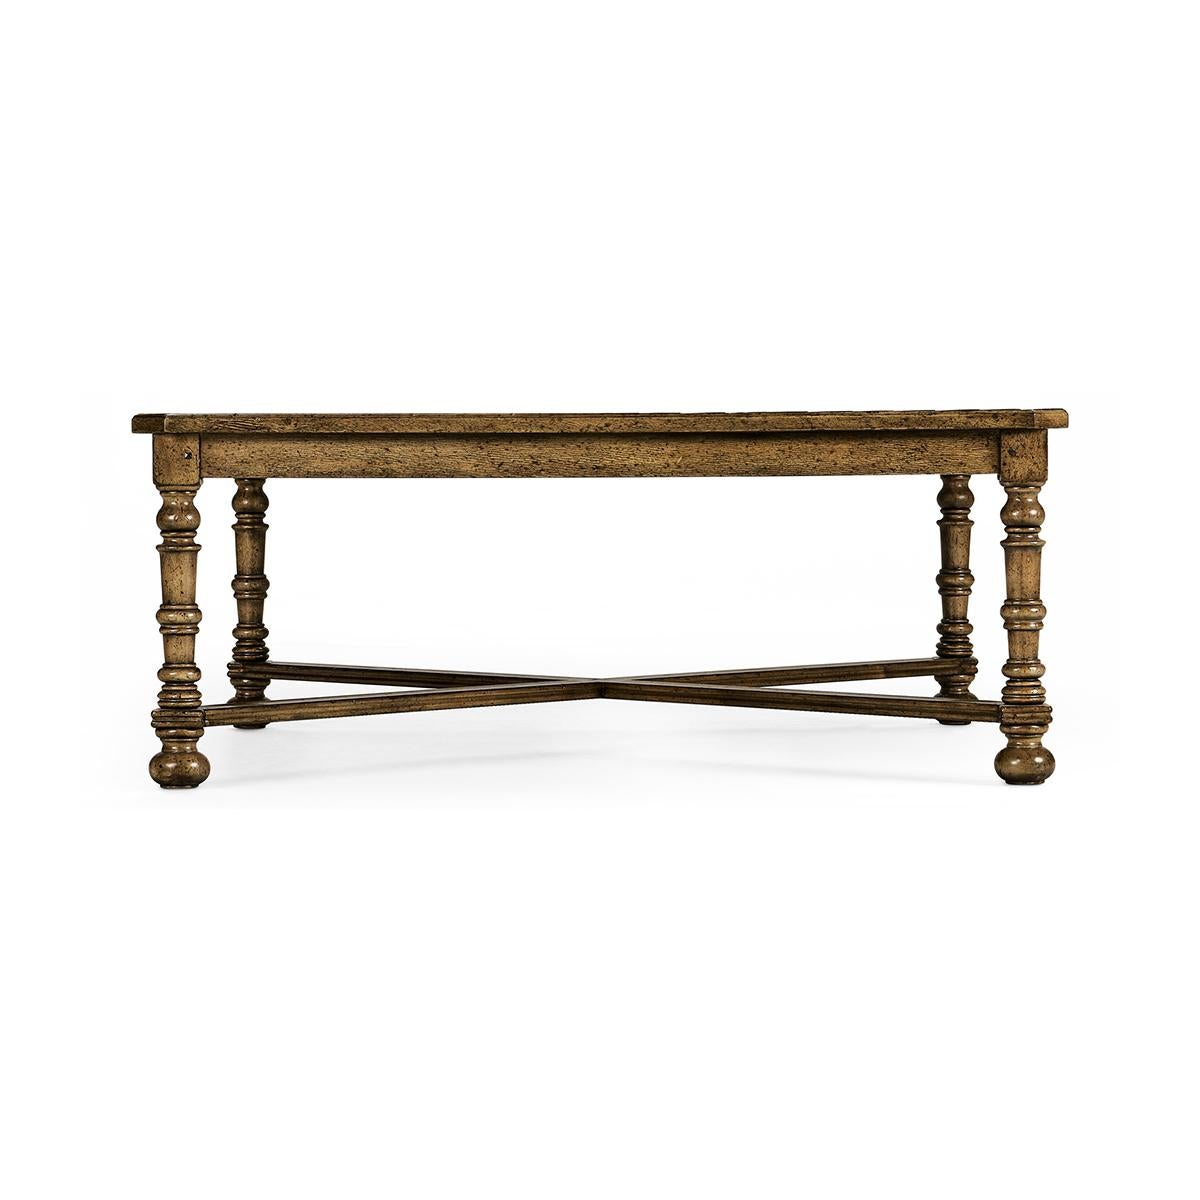 Large country coffee table, heavily distressed large square parquet top coffee table in a medium drift finish with a molded edge X-frame stretcher and raised on turned legs.

Dimensions: 50